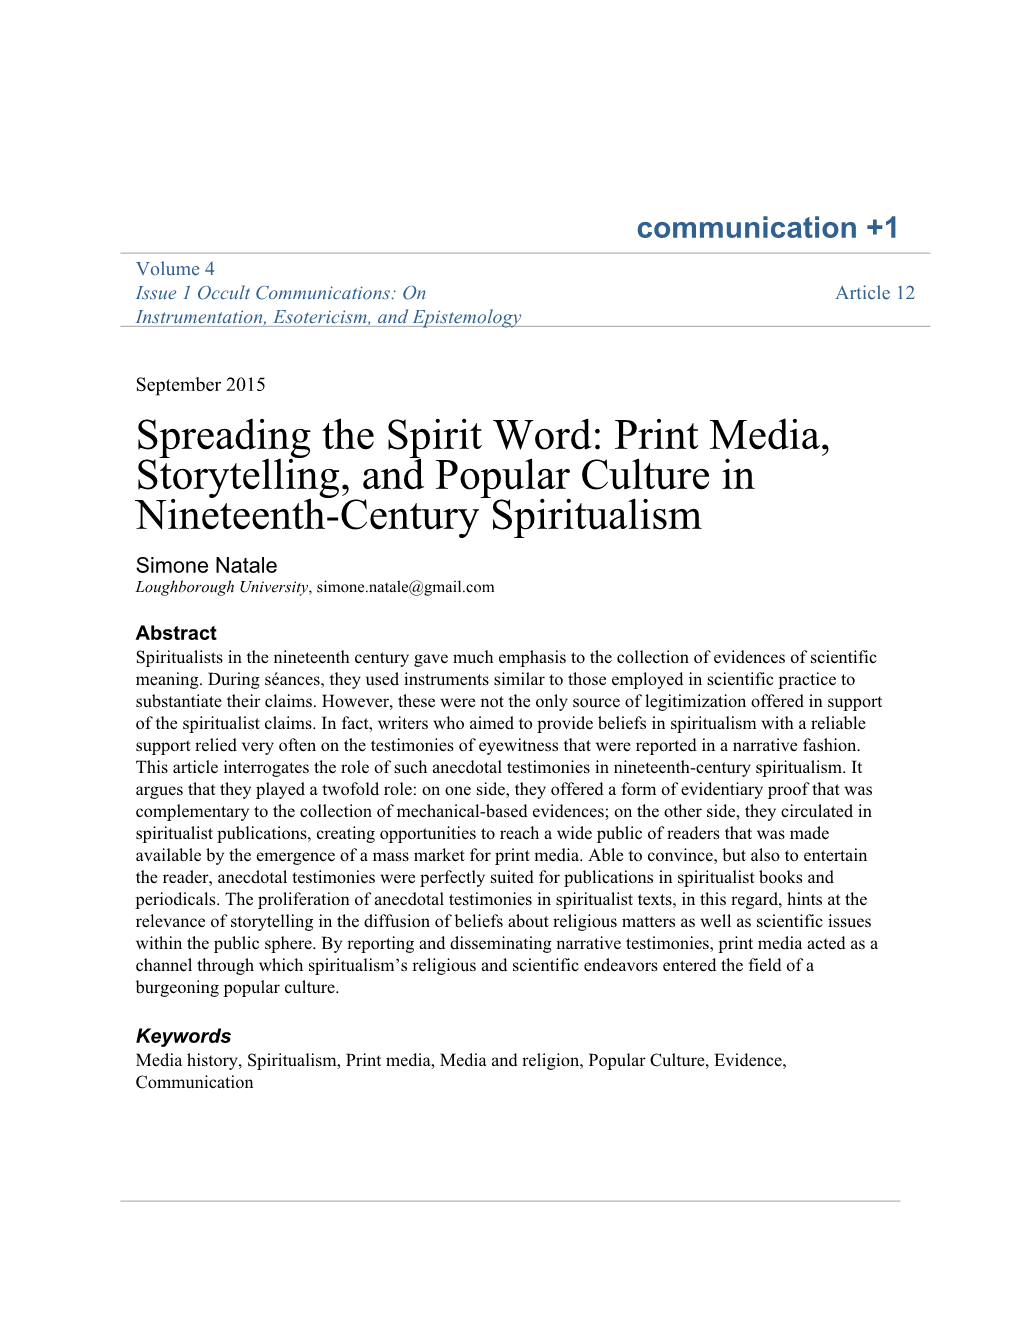 Spreading the Spirit Word: Print Media, Storytelling, and Popular Culture